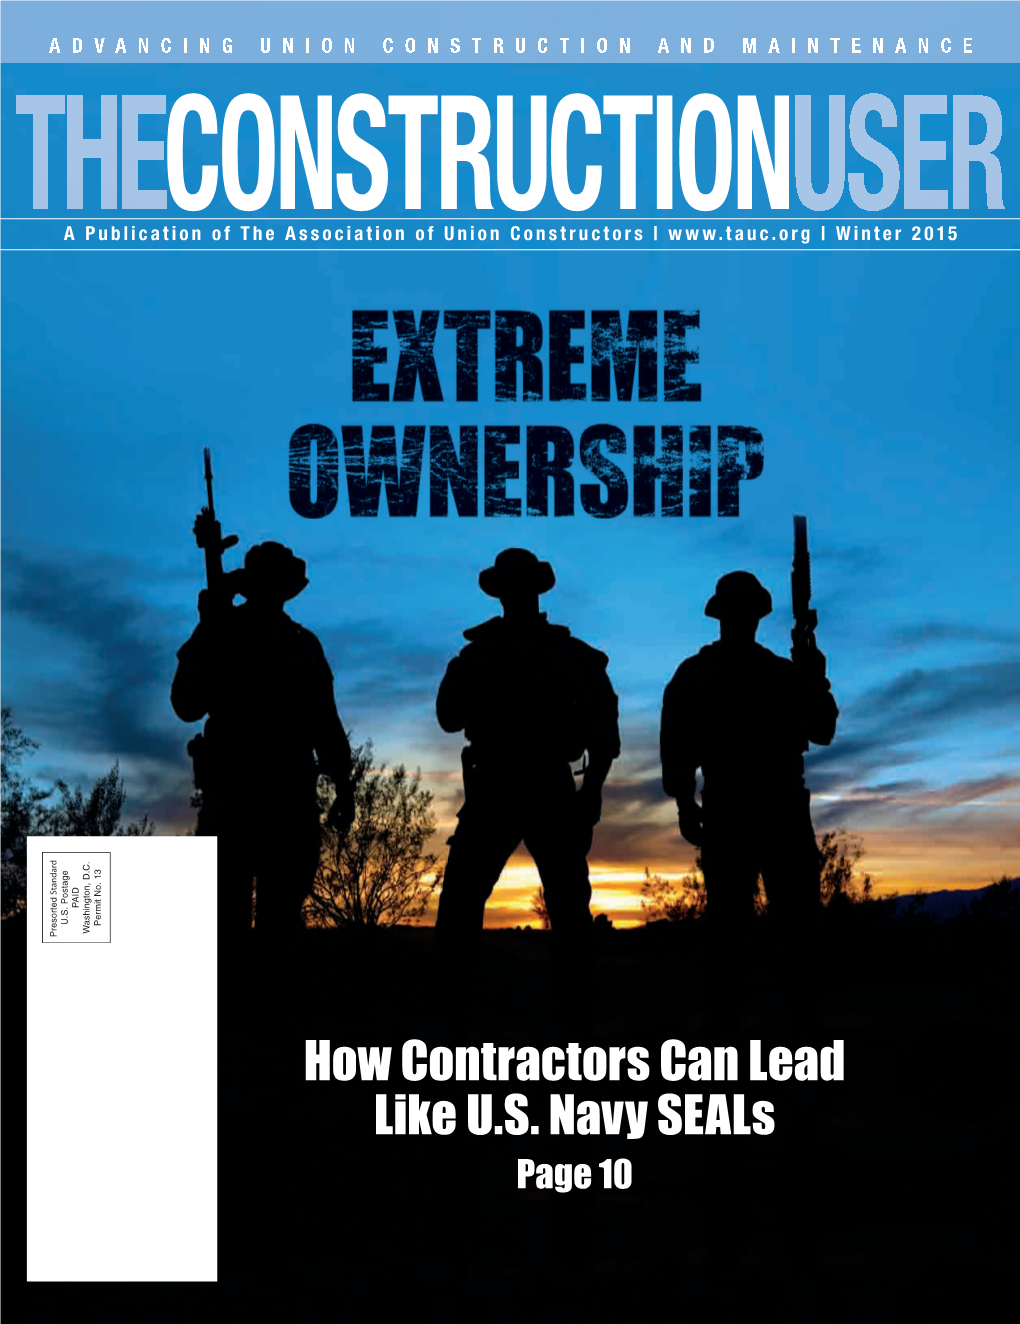 How Contractors Can Lead Like U.S. Navy Seals Page 10